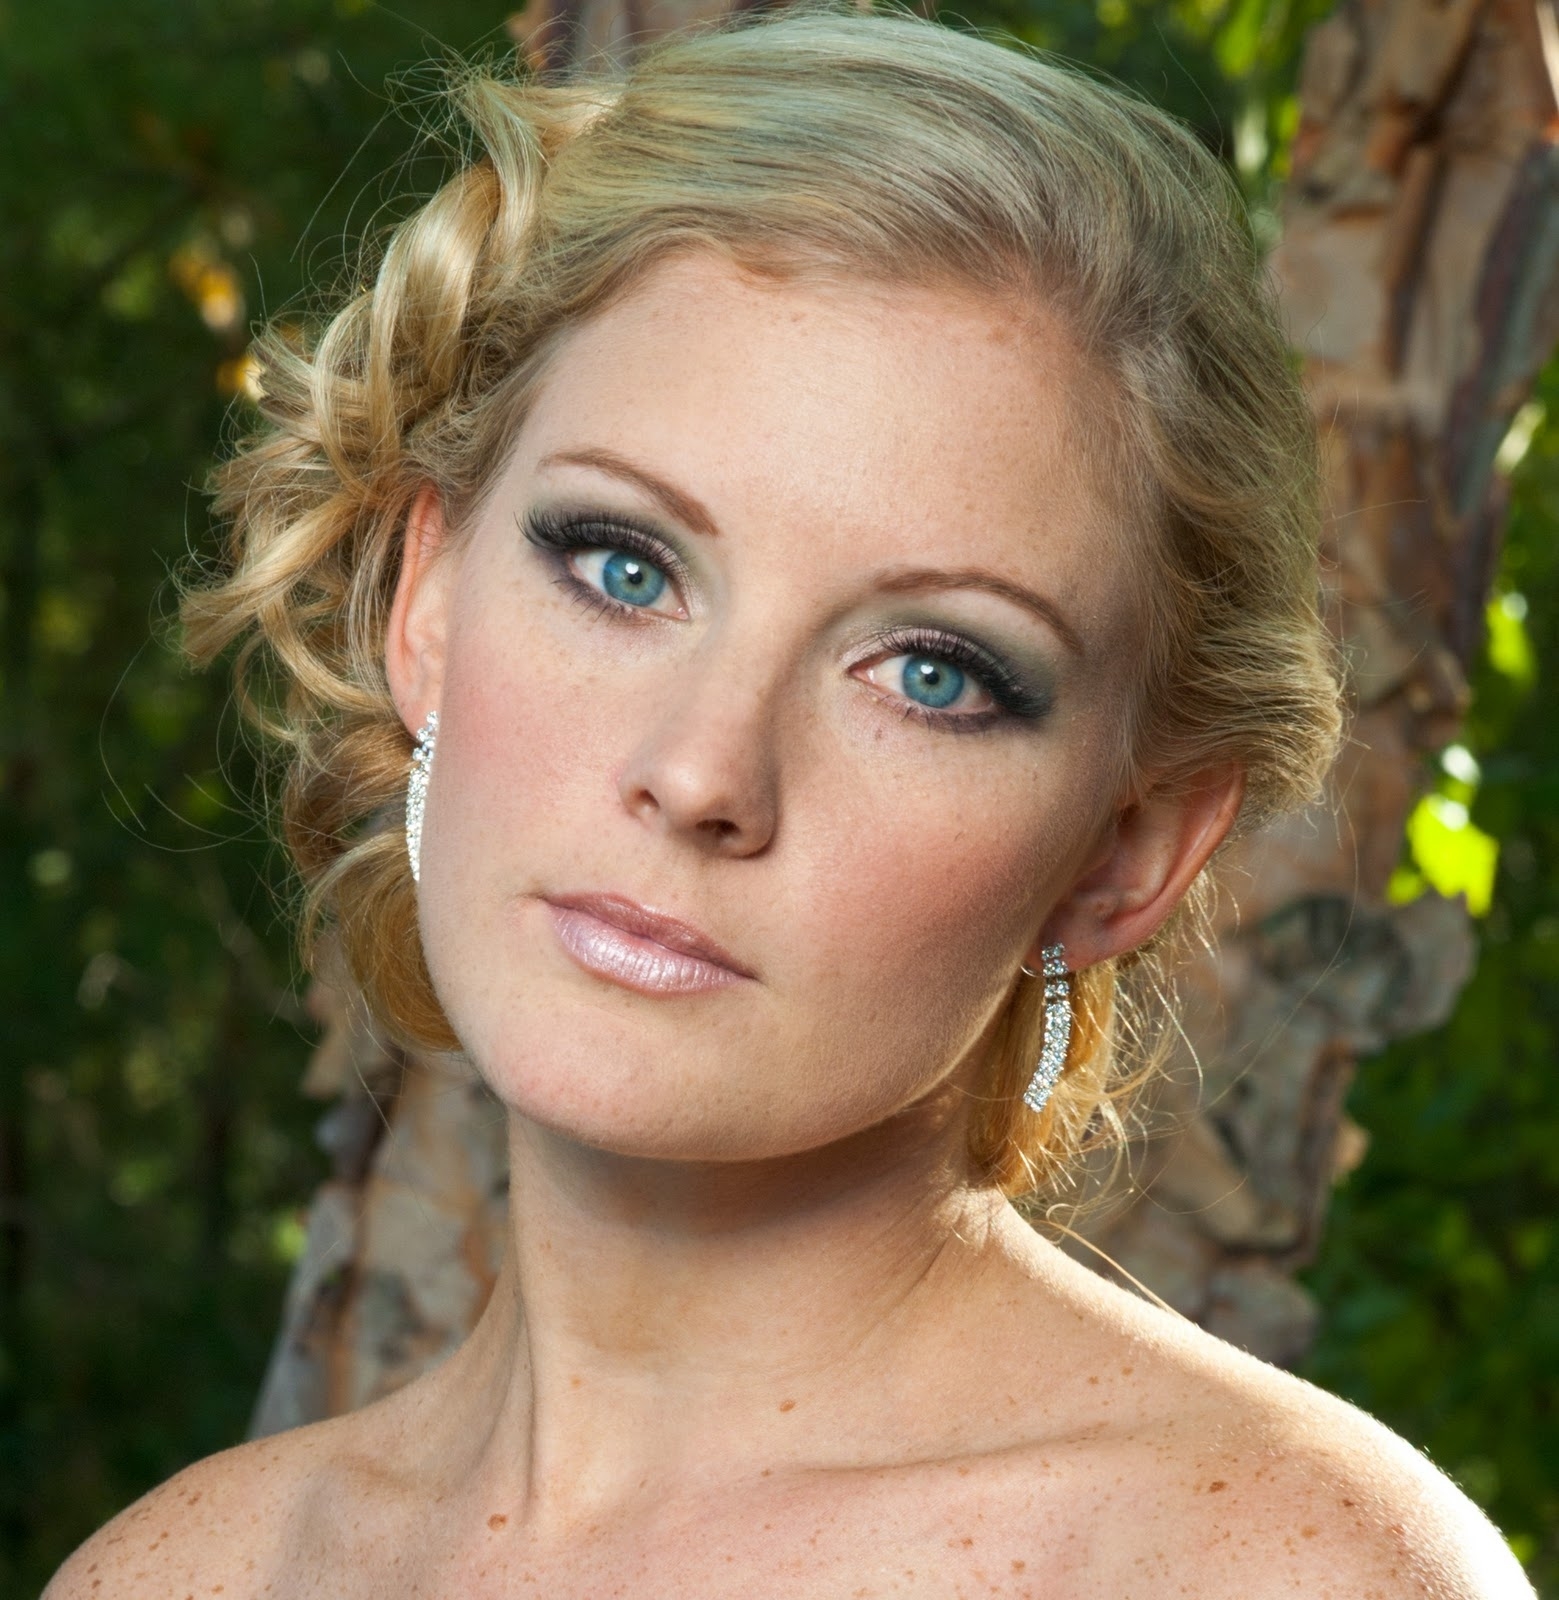 Wedding Makeup Tips For Blue-Eyed Brides With Blond Hair | Bride Sparkle regarding Makeup Tips For Blue Green Eyes And Light Brown Hair